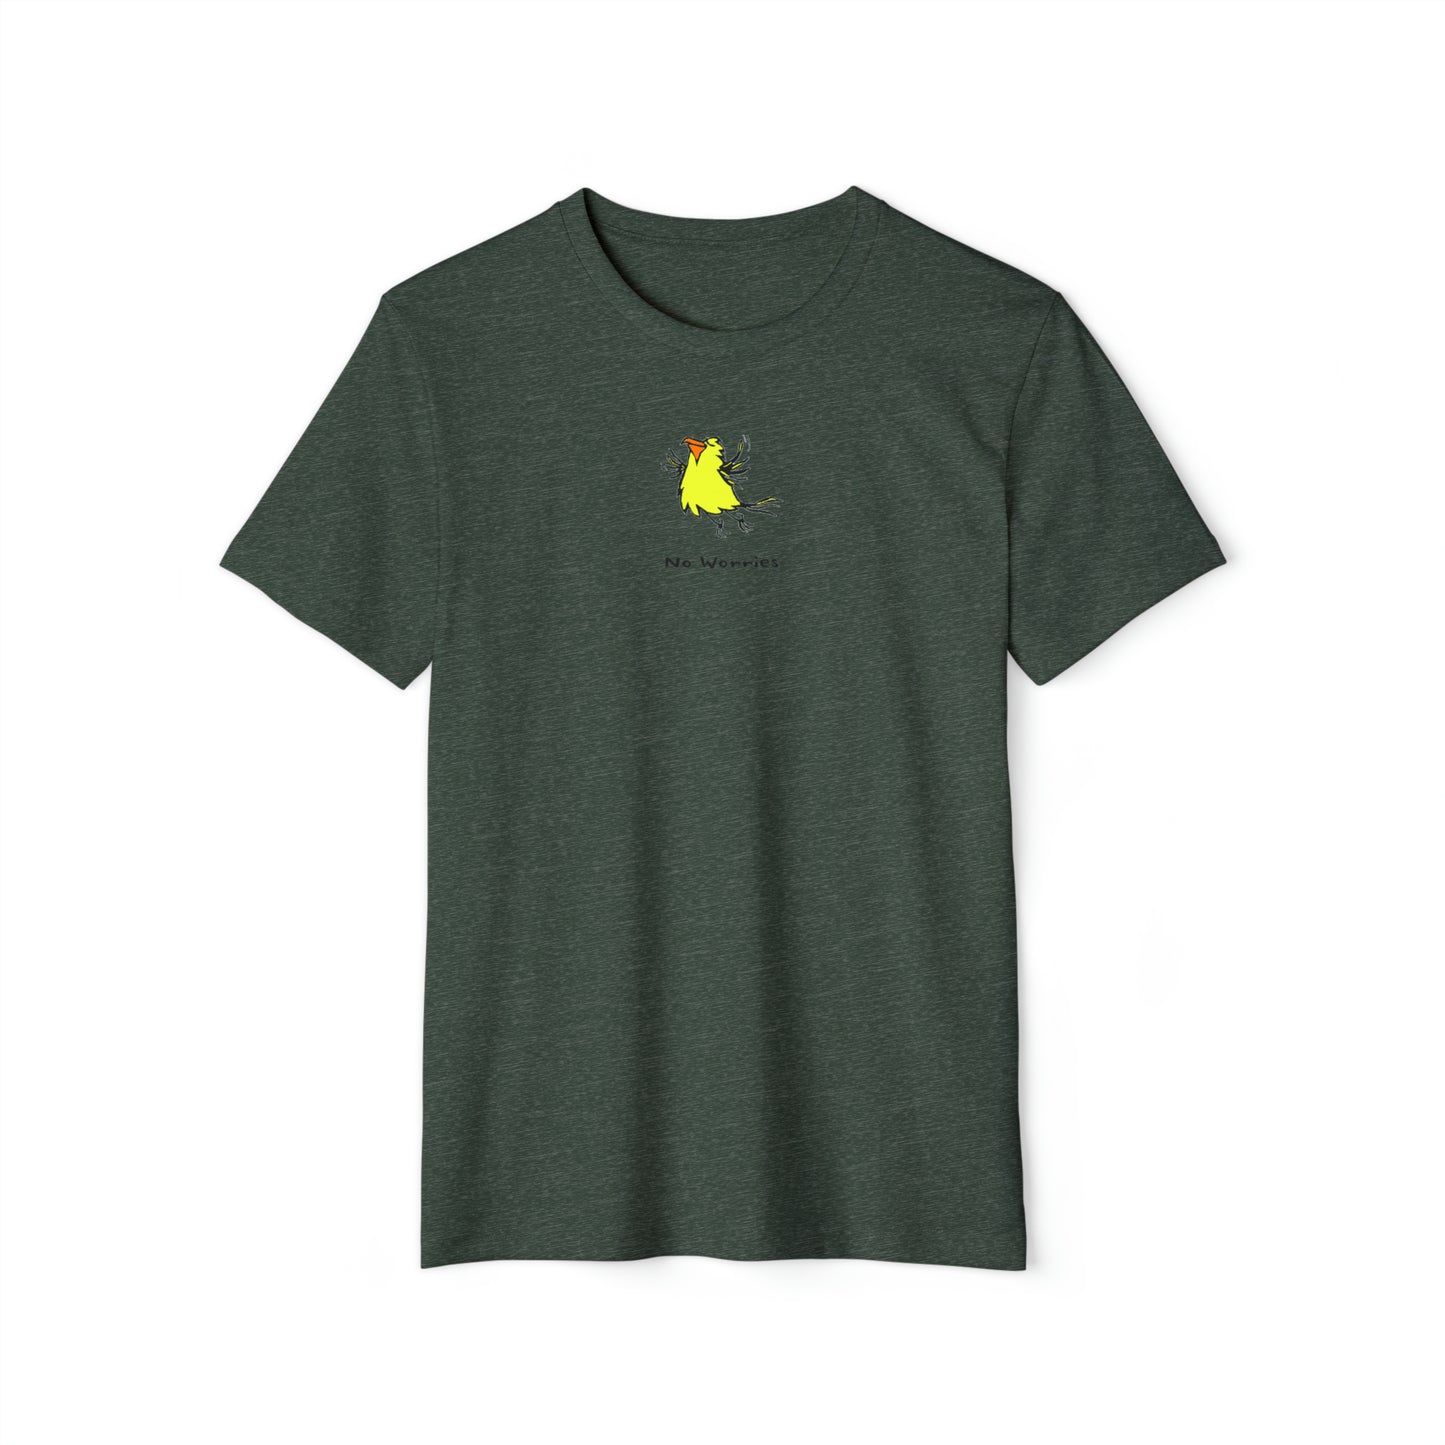 Yellow flying bird with orange beak on heather forest green color unisex men's t-shirt. Text under image says No Worries